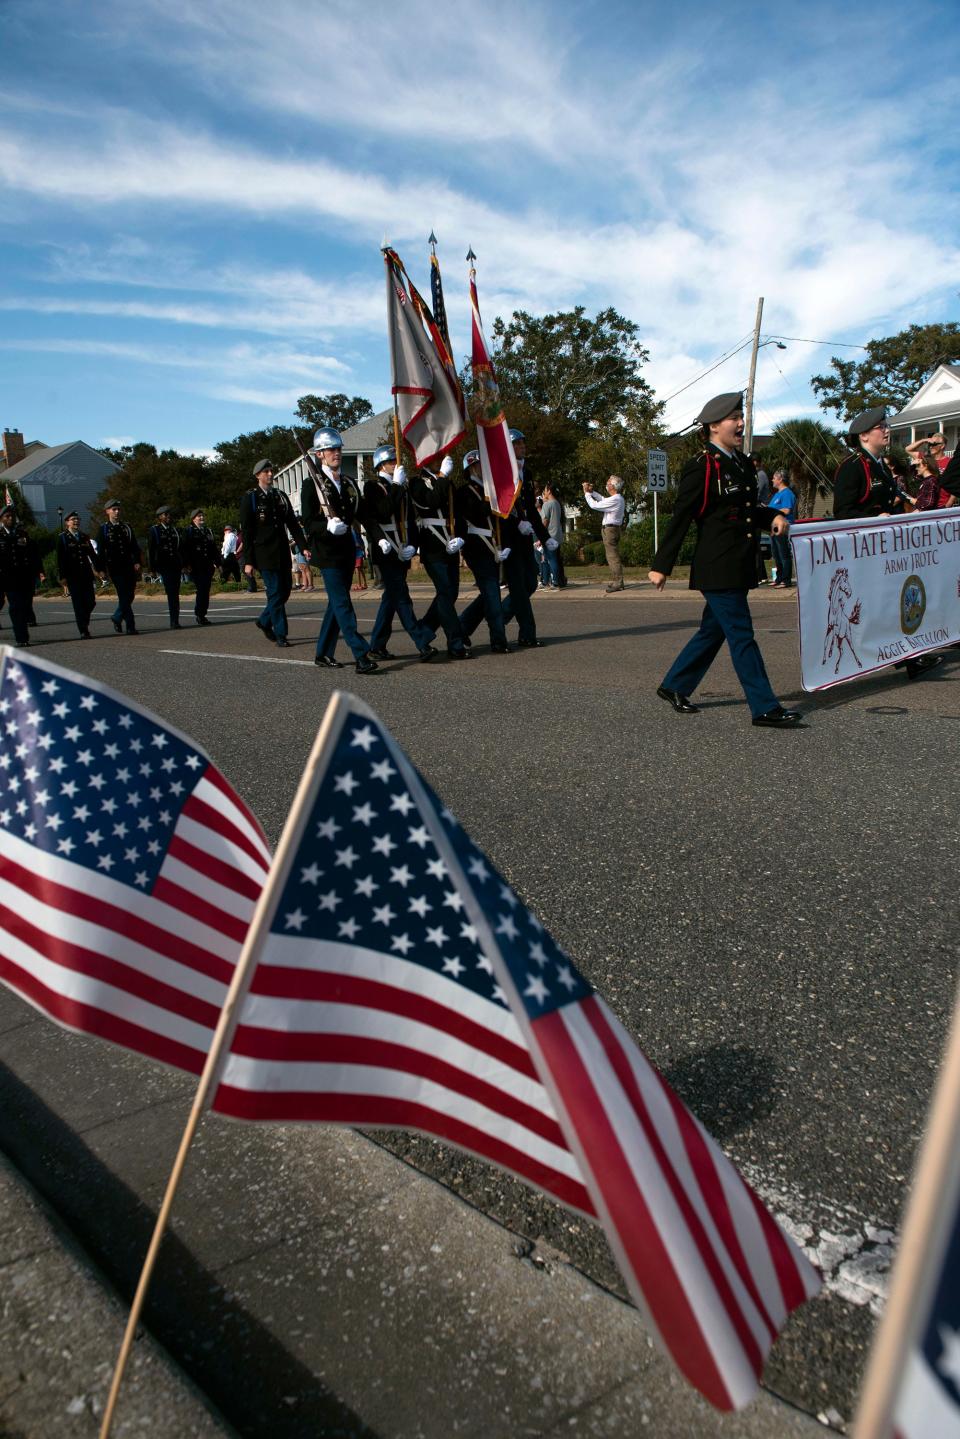 Veterans groups, members of law enforcement, civic organizations, high school ROTC units, marching bands, and politicians march along Bayfront Parkway on Nov. 11, 2021, during the annual Veterans Day parade in Pensacola.